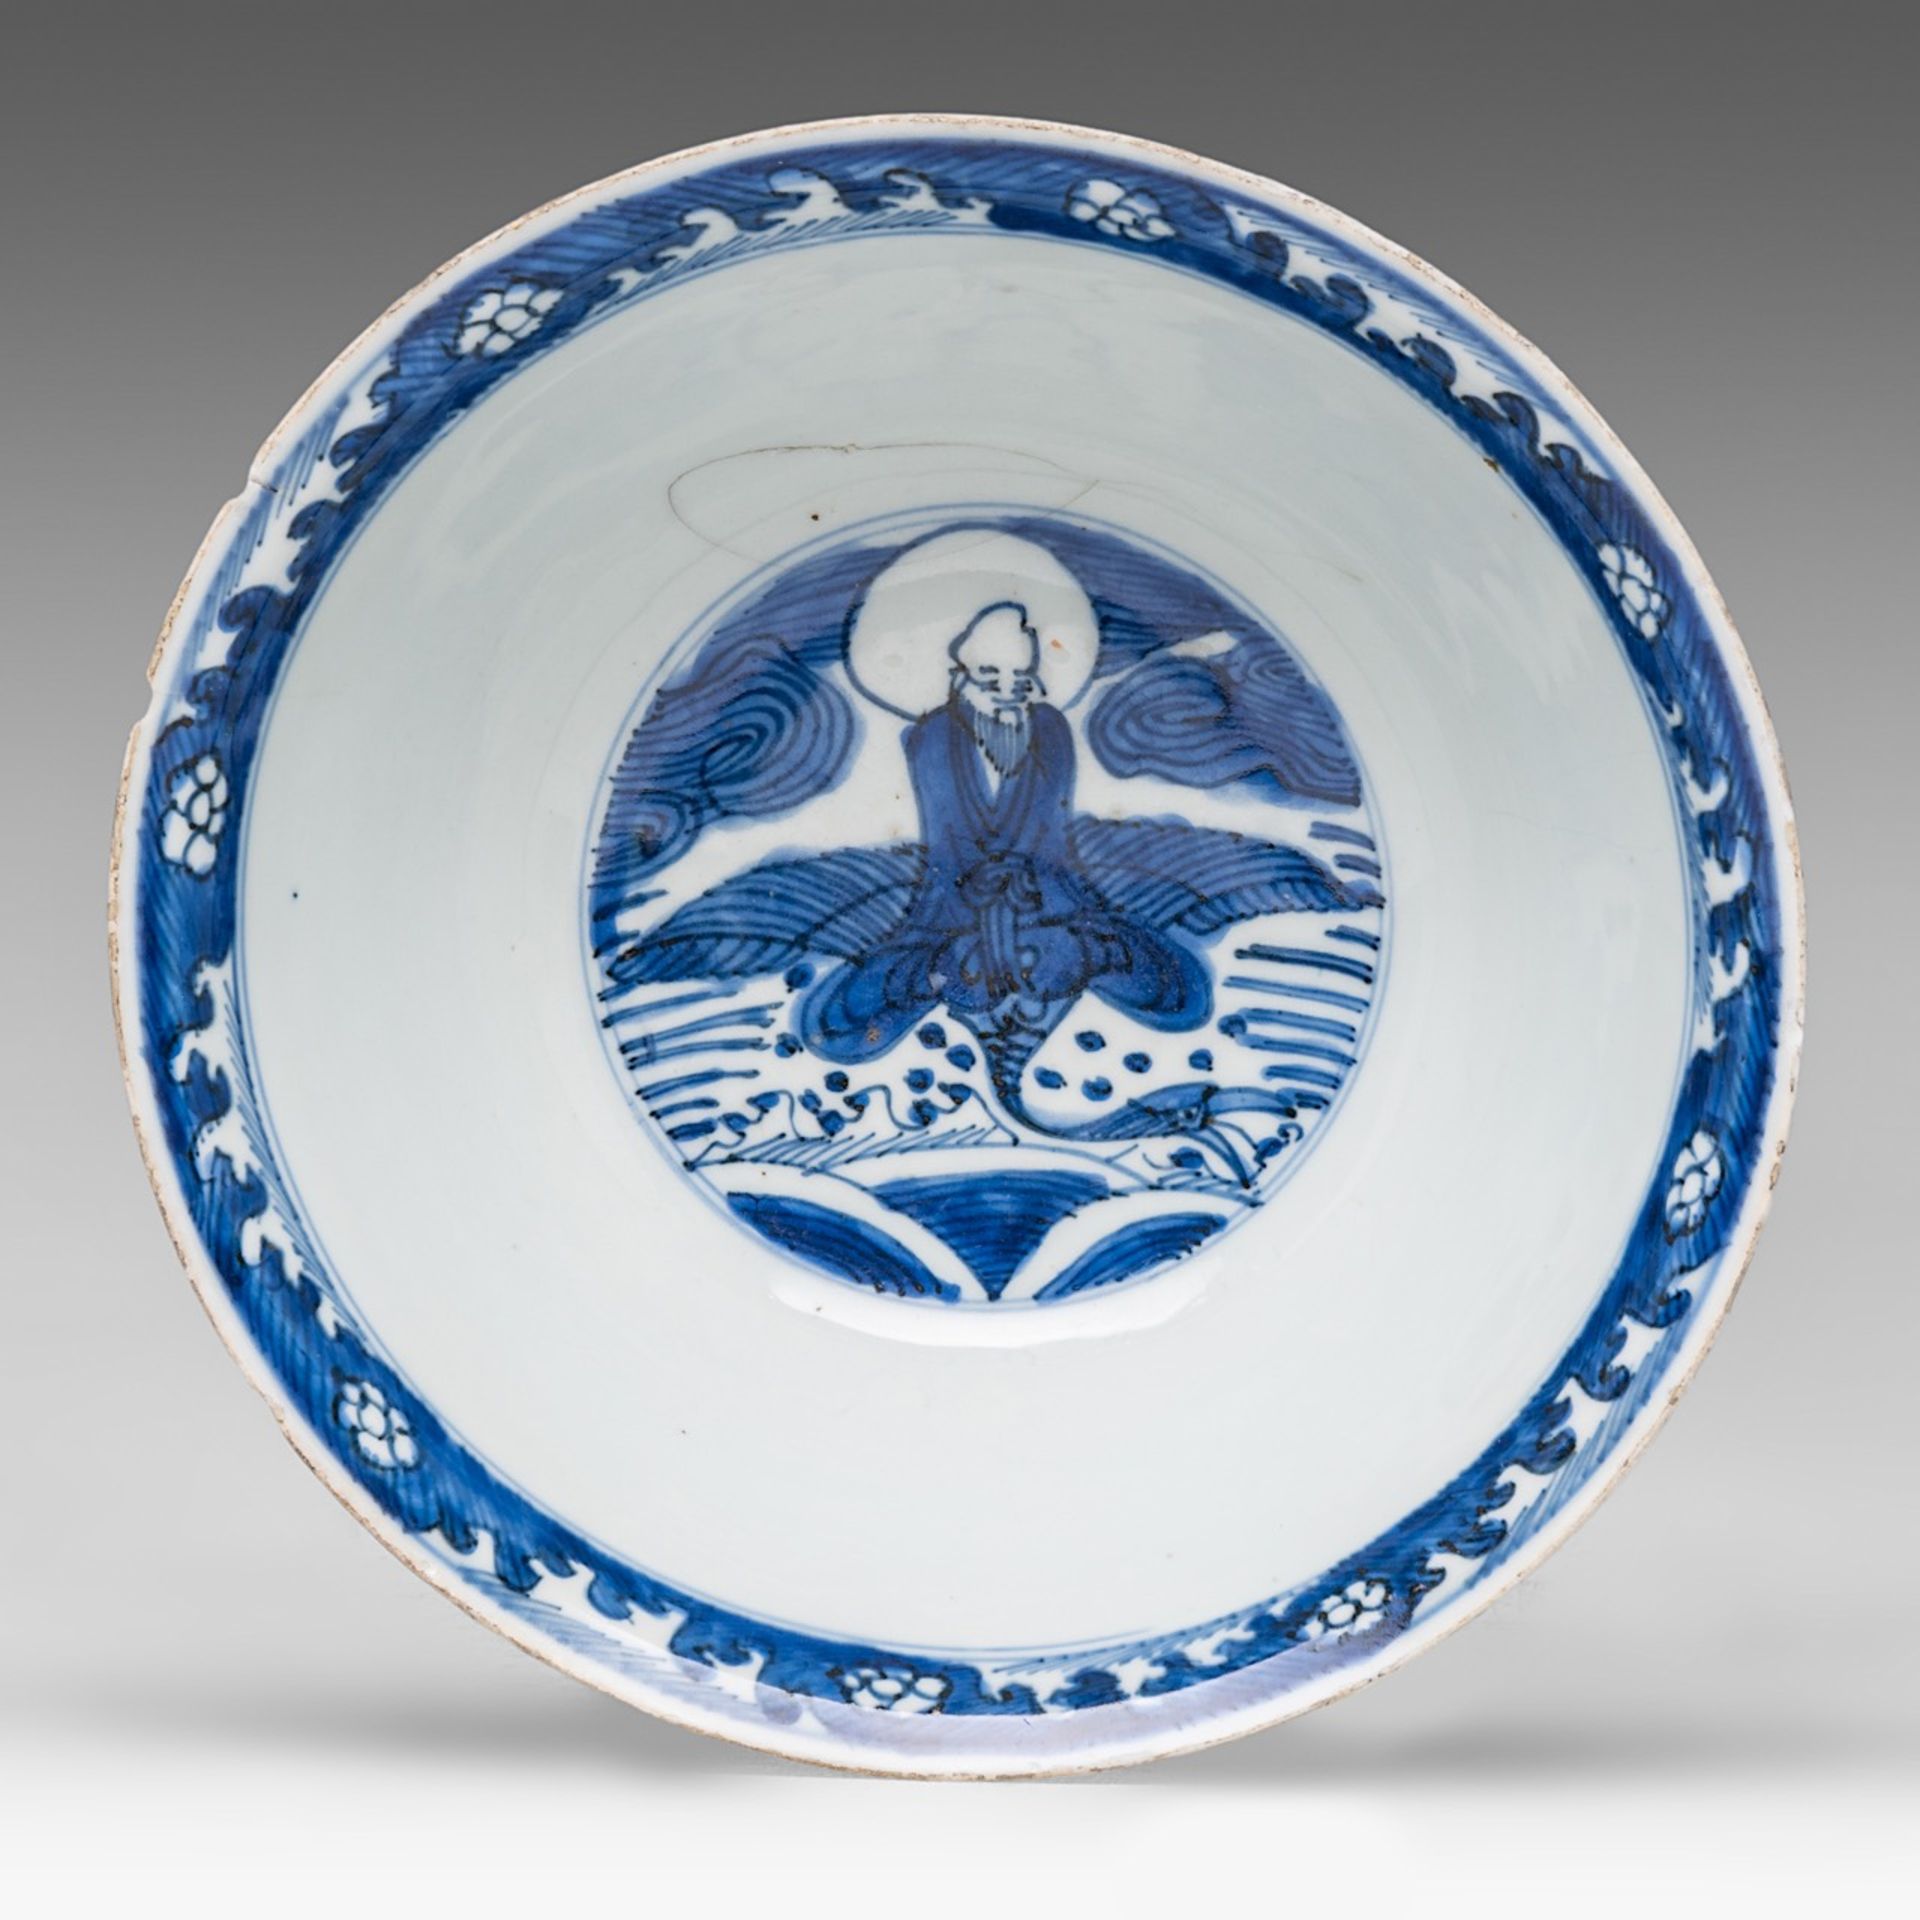 A Chinese blue and white 'Luohan' bowl, Wanli period, Ming dynasty, H 9 - dia 22,5 cm - Image 3 of 8